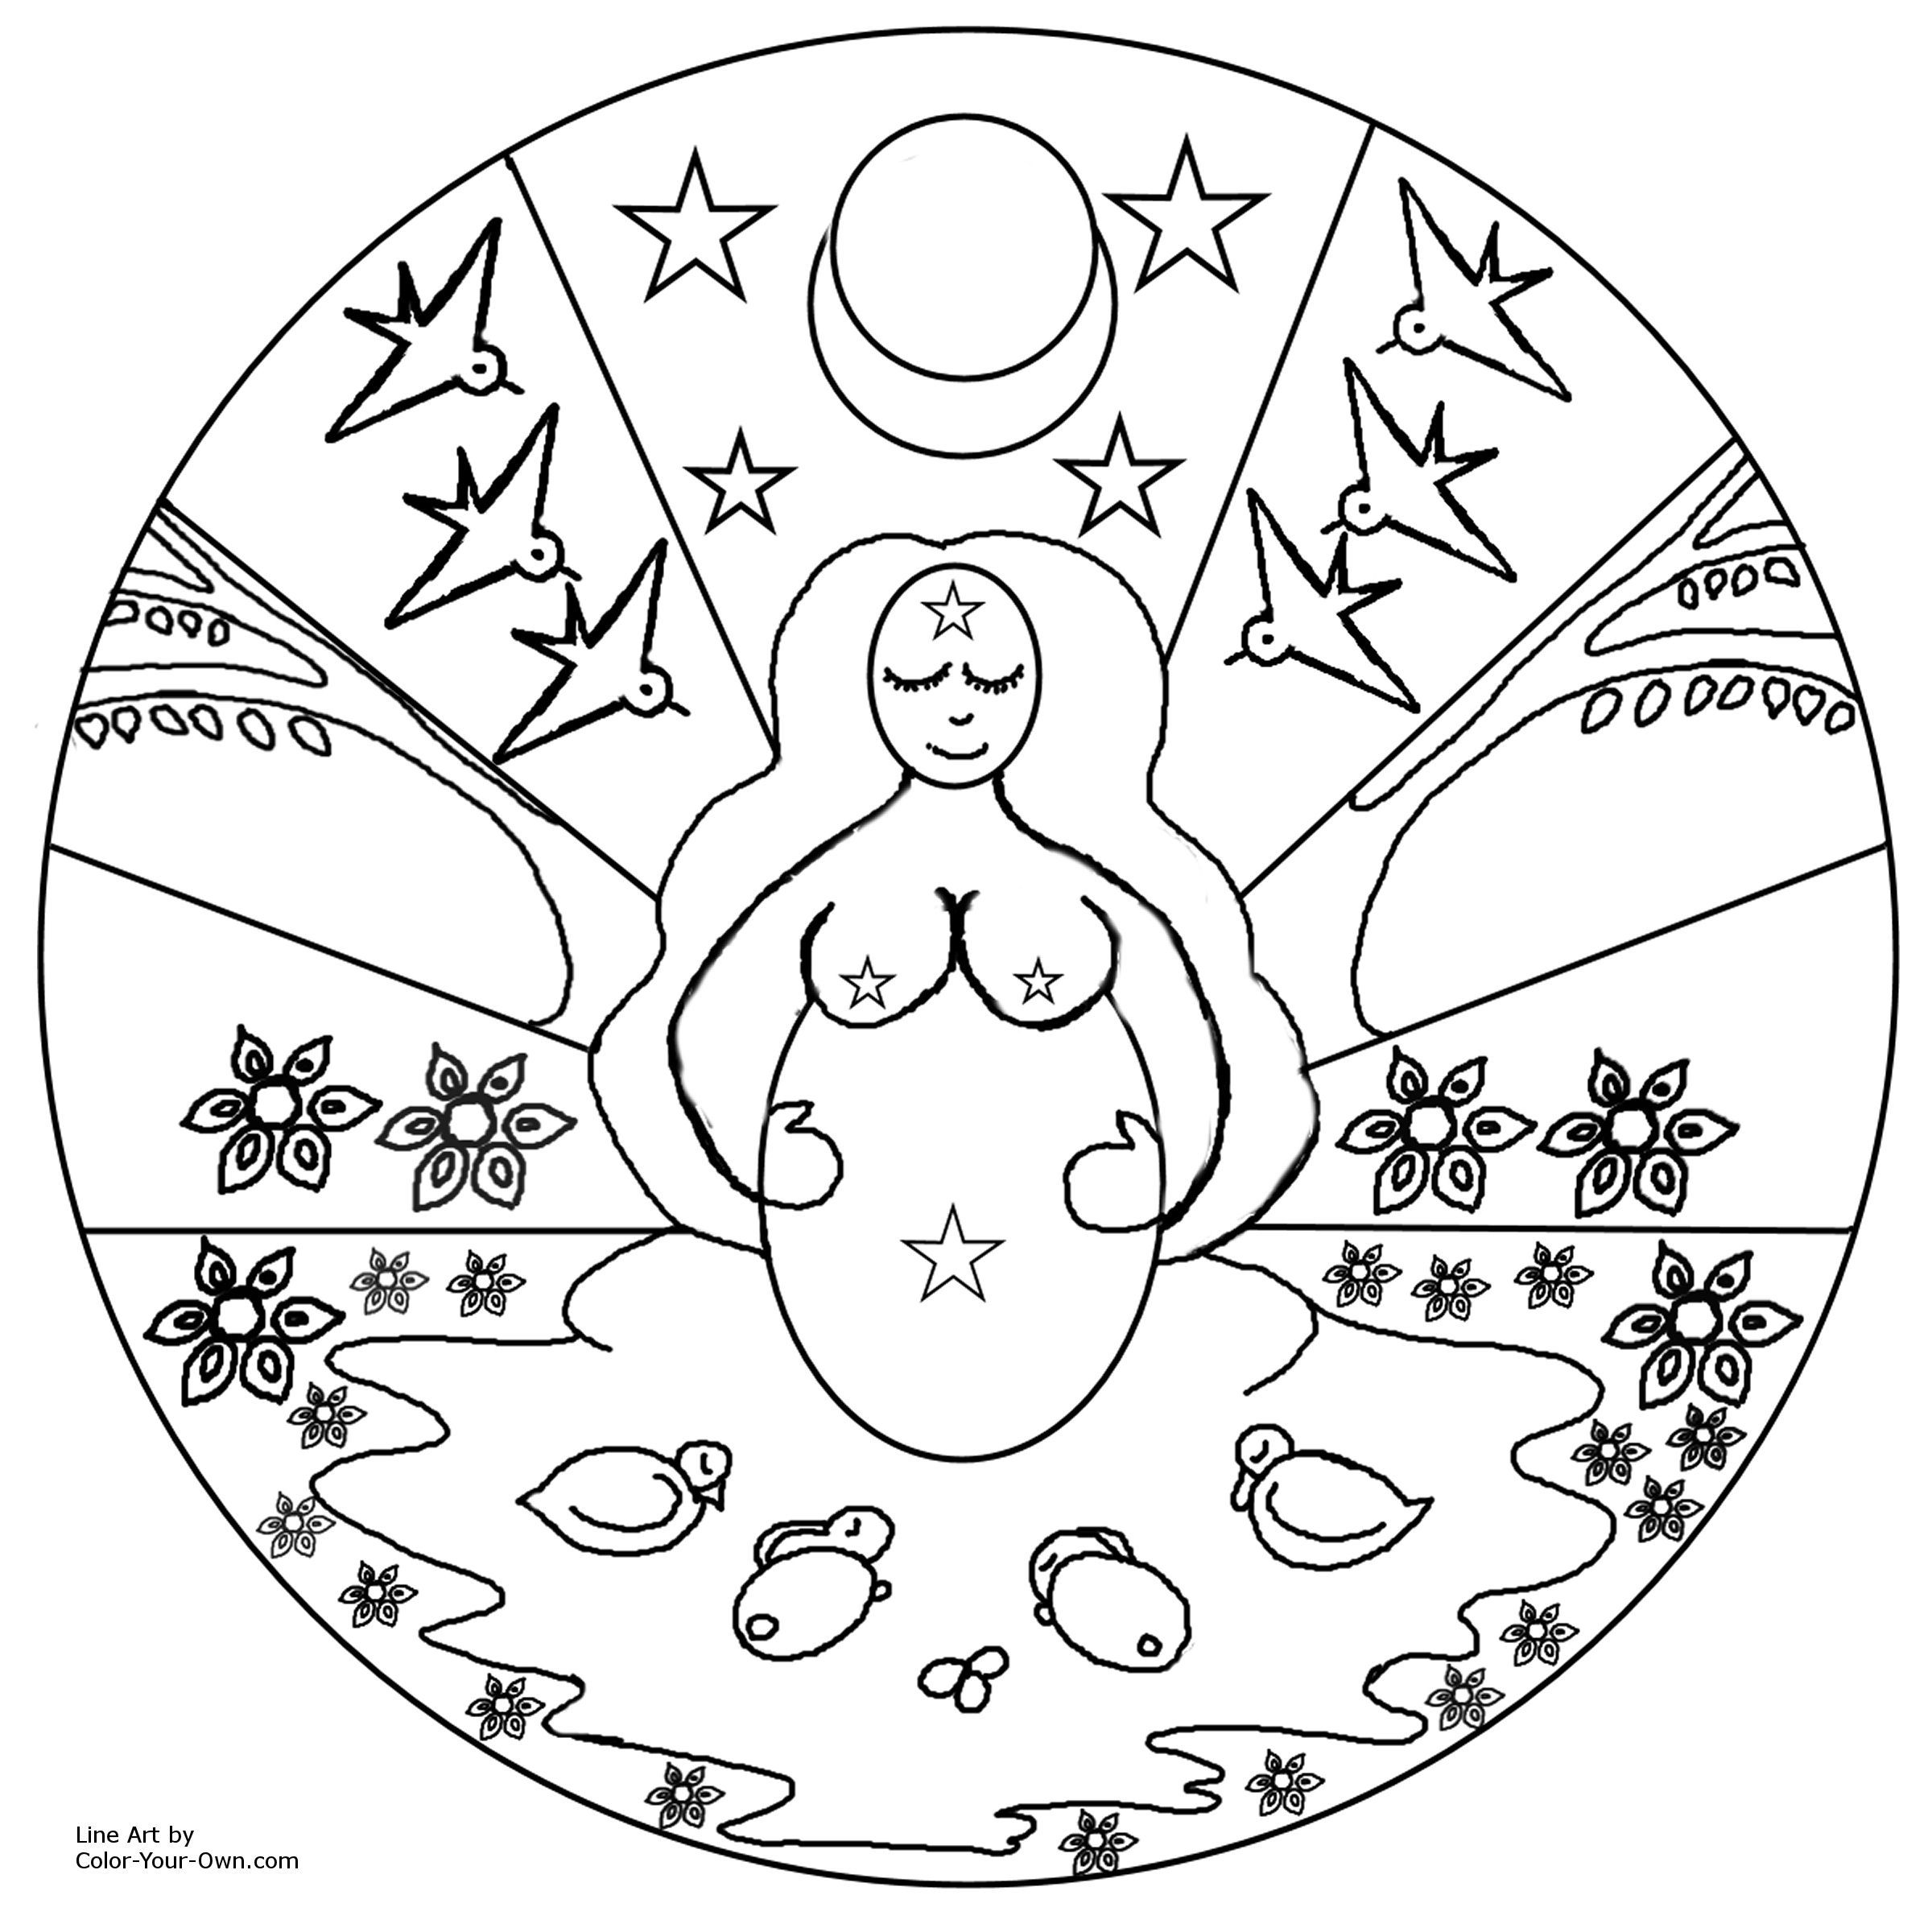 New Coloring Pages - Spring Mandalas to color | Coloring Pages Blog